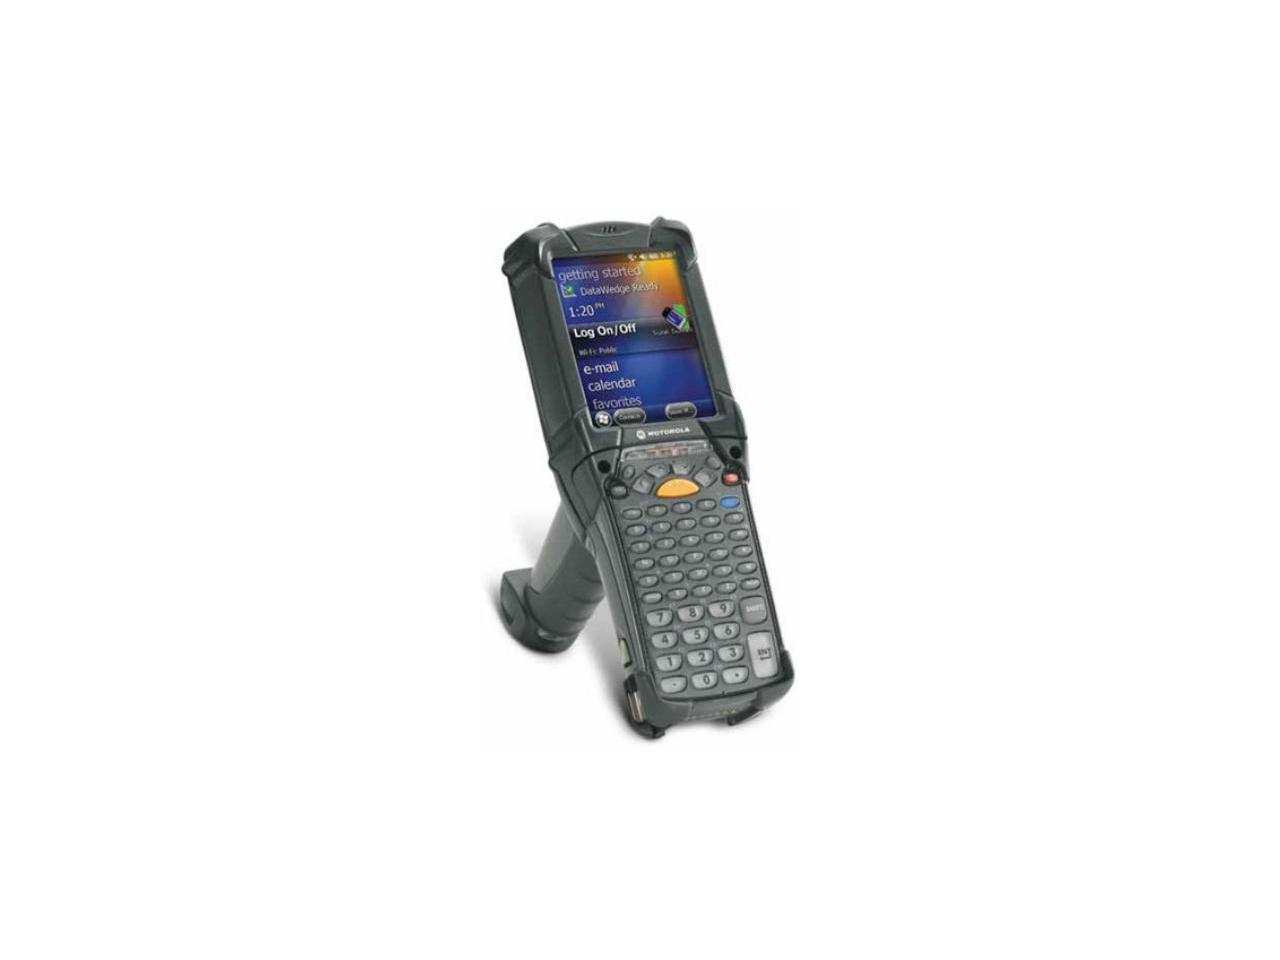 Details about   Inventory Software for Symbol Motorola Zebra MC9200 MC9500 PDA barcode scanners 